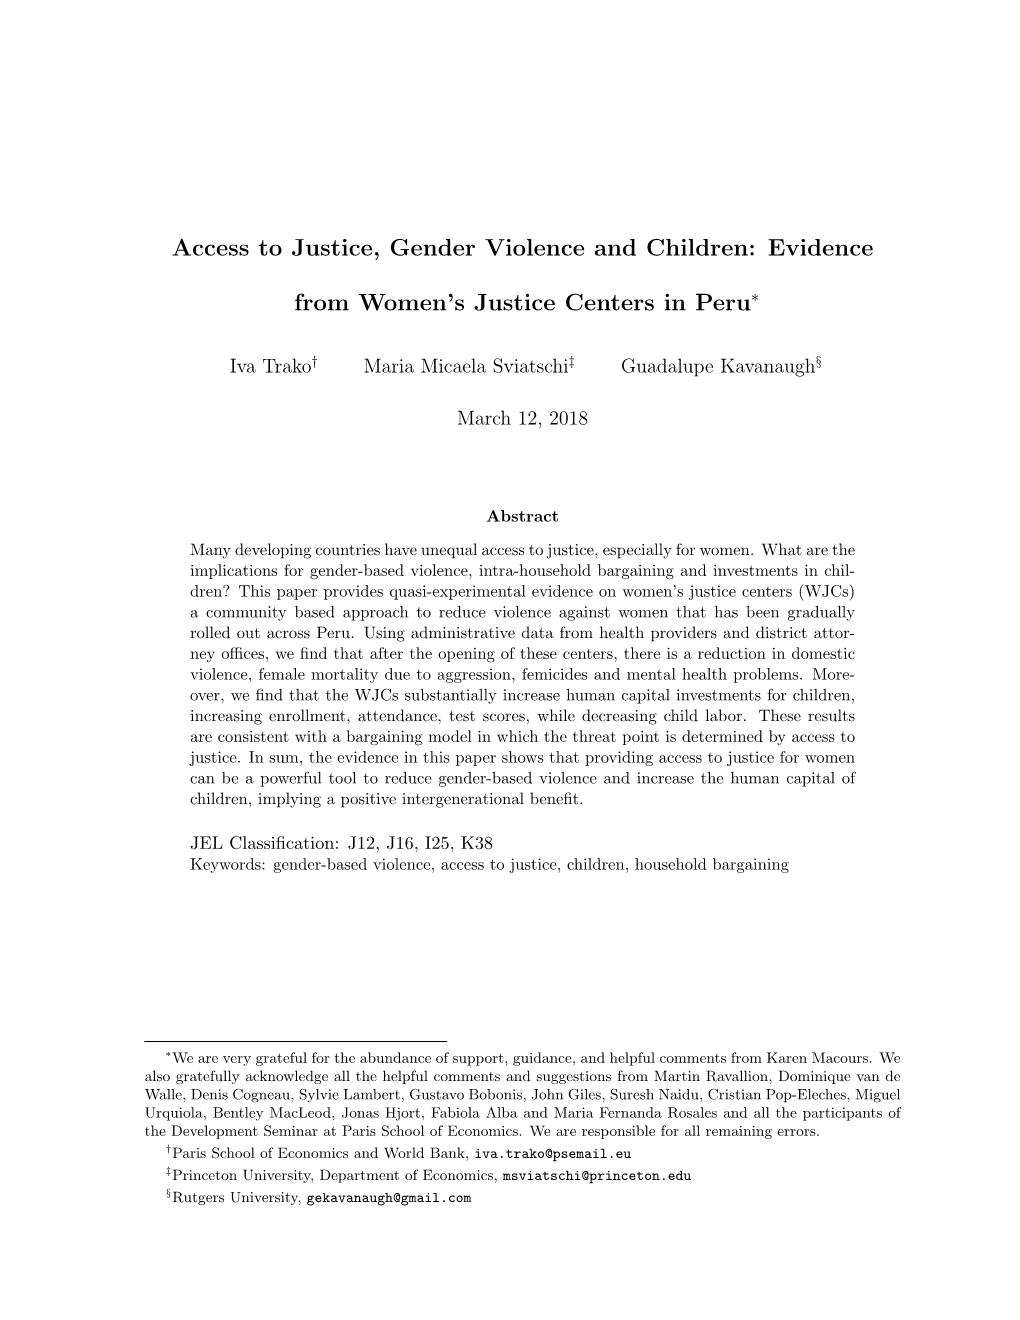 Access to Justice, Gender Violence and Children: Evidence From